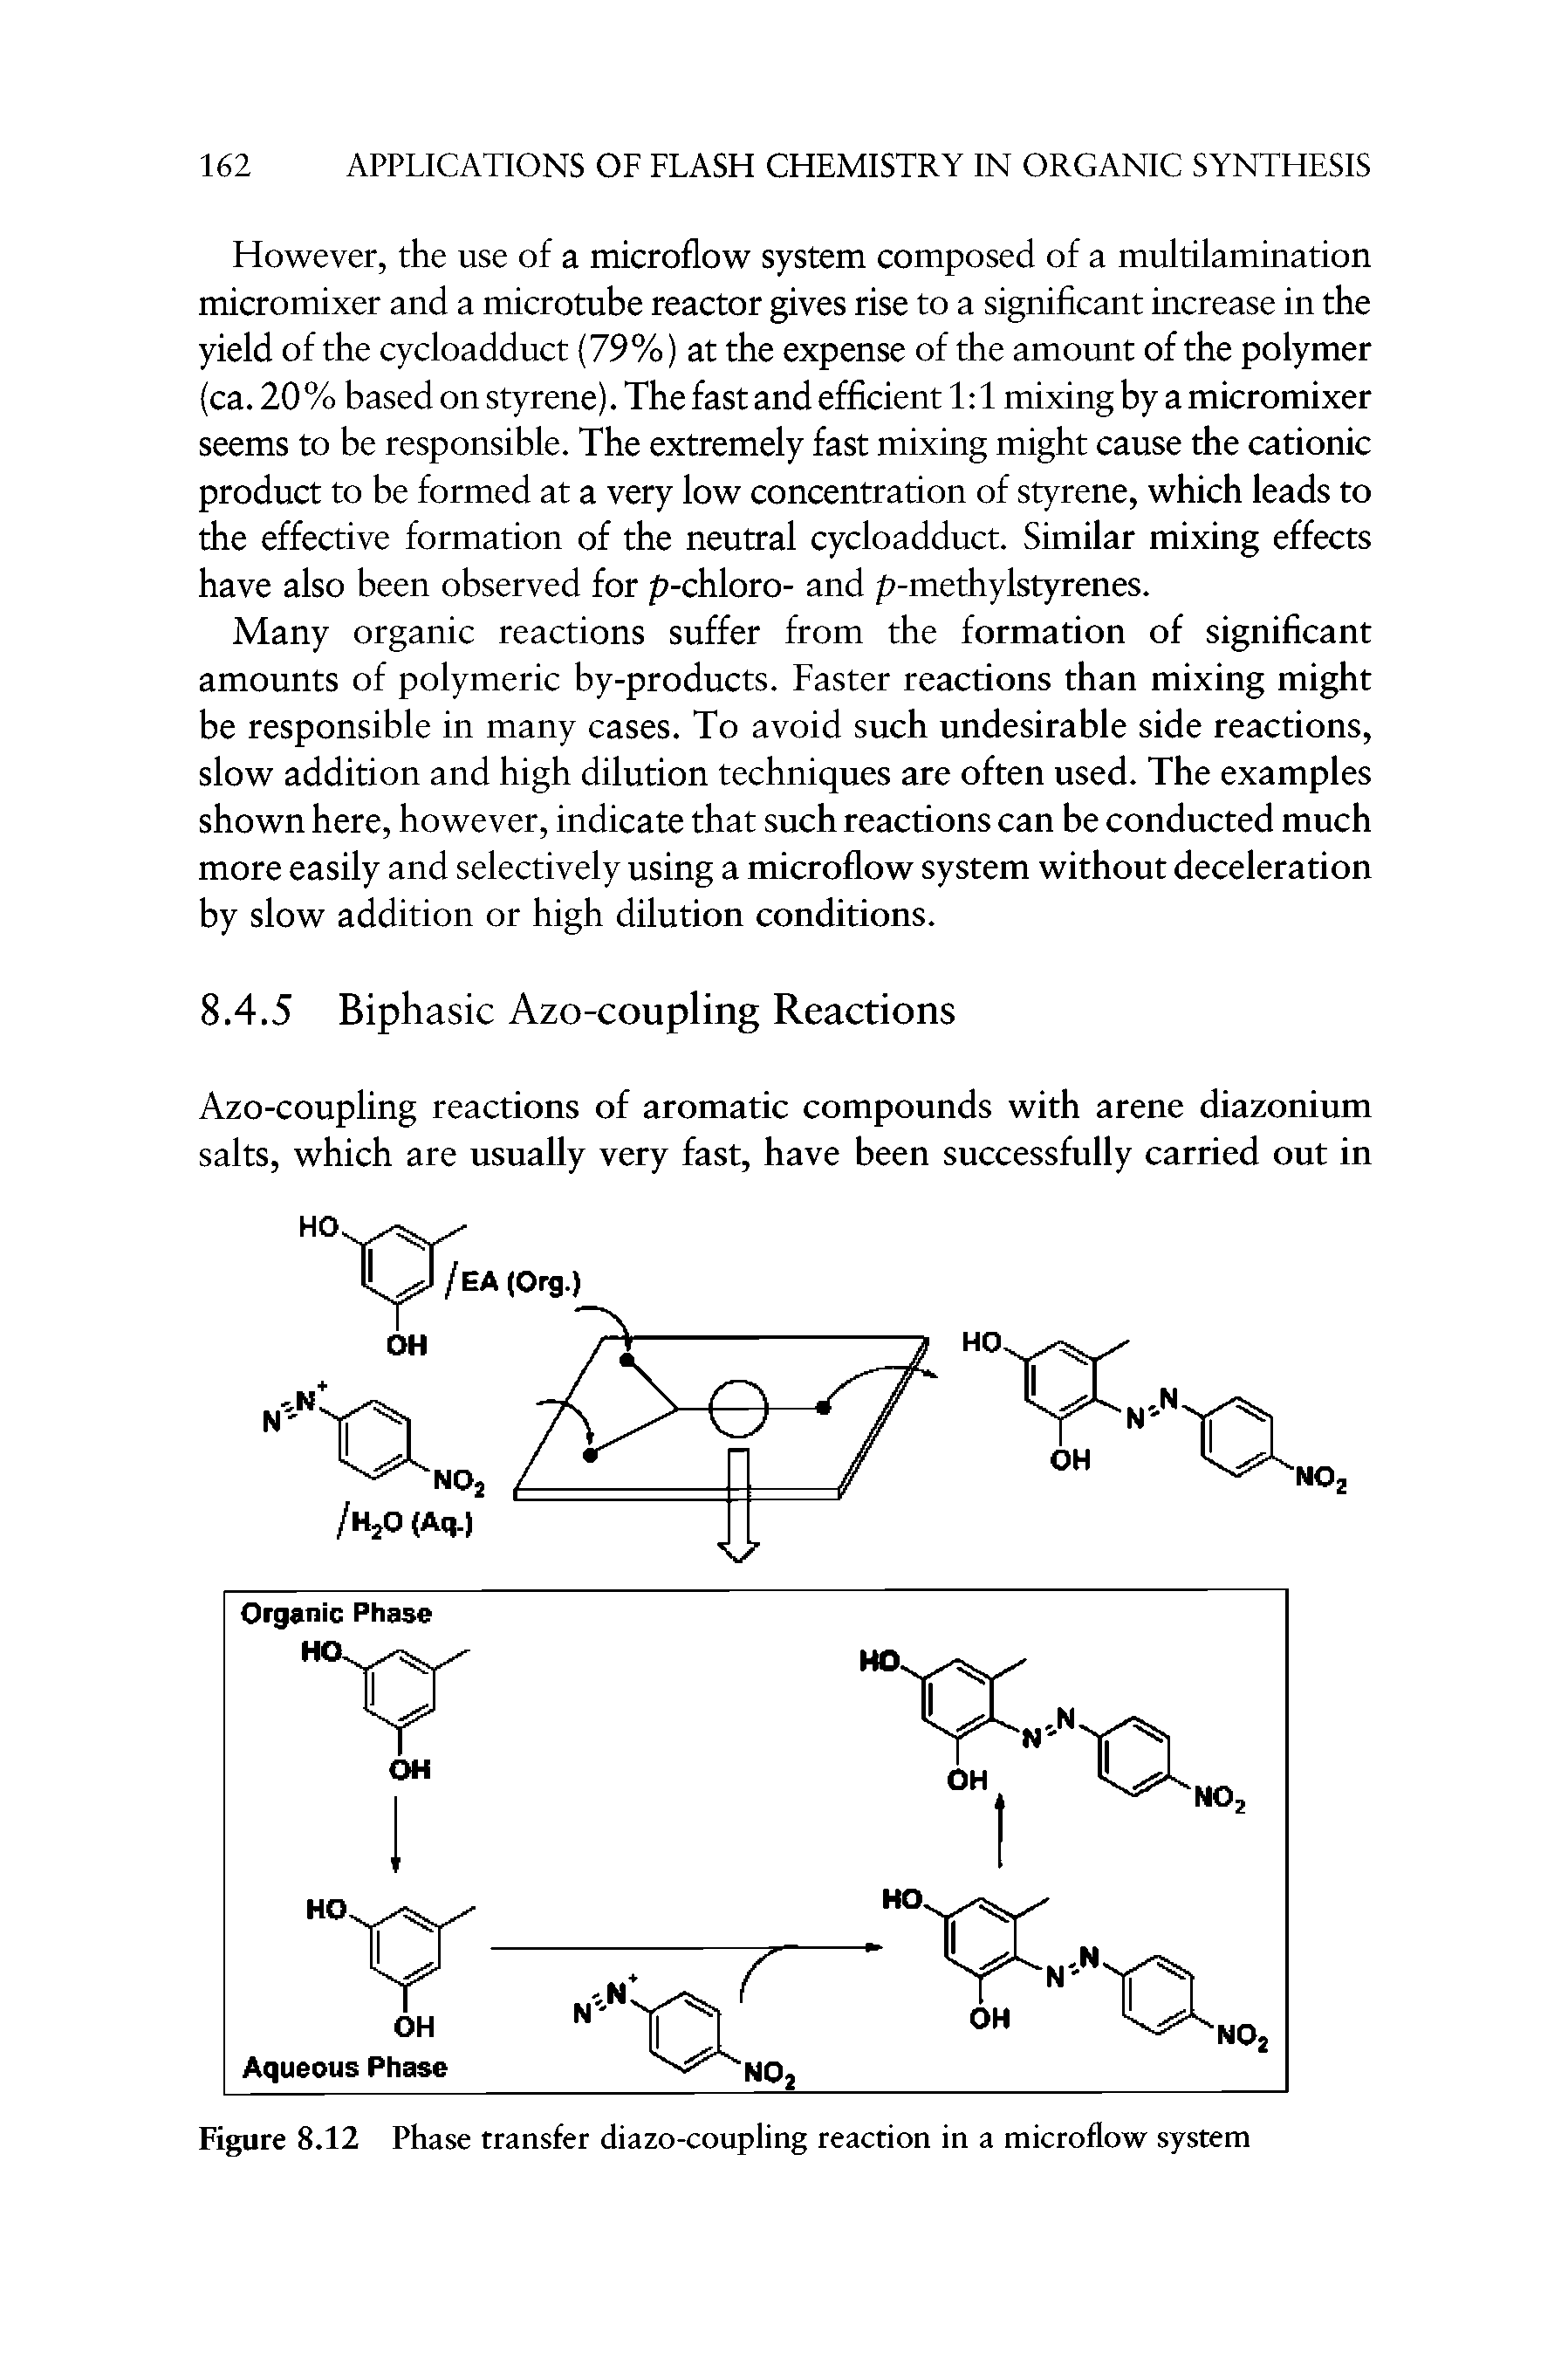 Figure 8.12 Phase transfer diazo-coupling reaction in a microflow system...